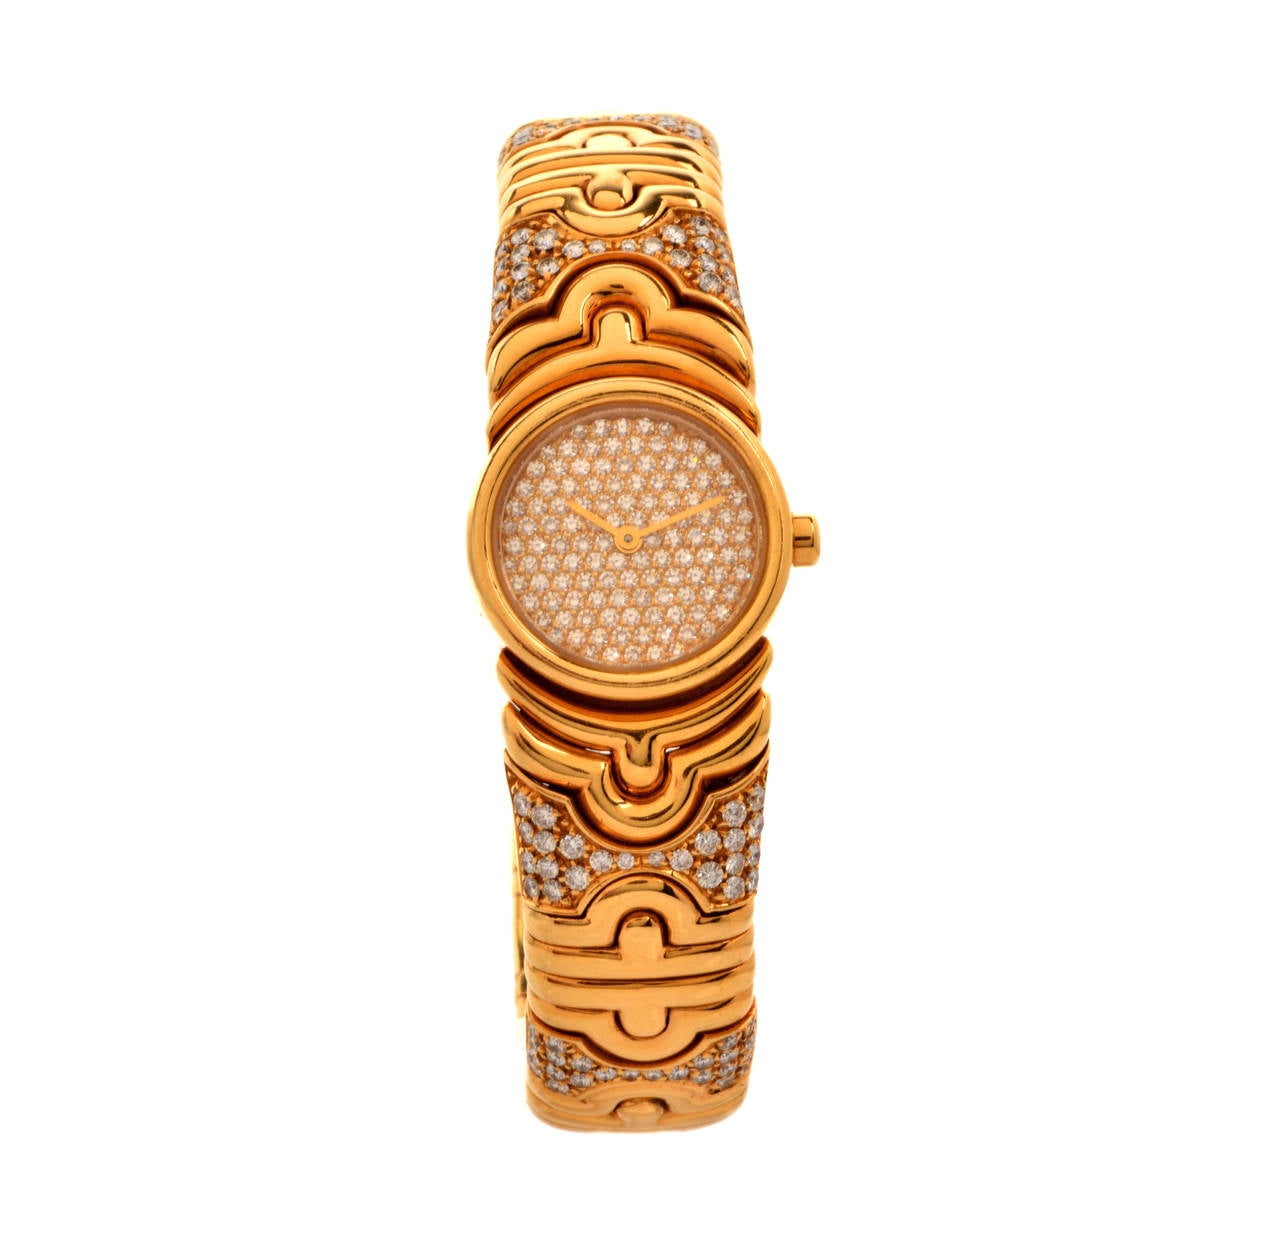 This Bulgari lady's 18k yellow gold and diamond Parentesi bangle bracelet watch weighs 89.2 grams, with approx 5.50 carats of factory-set brilliant-cut diamonds, graded F-G color and VVS1clarity. This watch features a quartz movement, a 20mm case, a